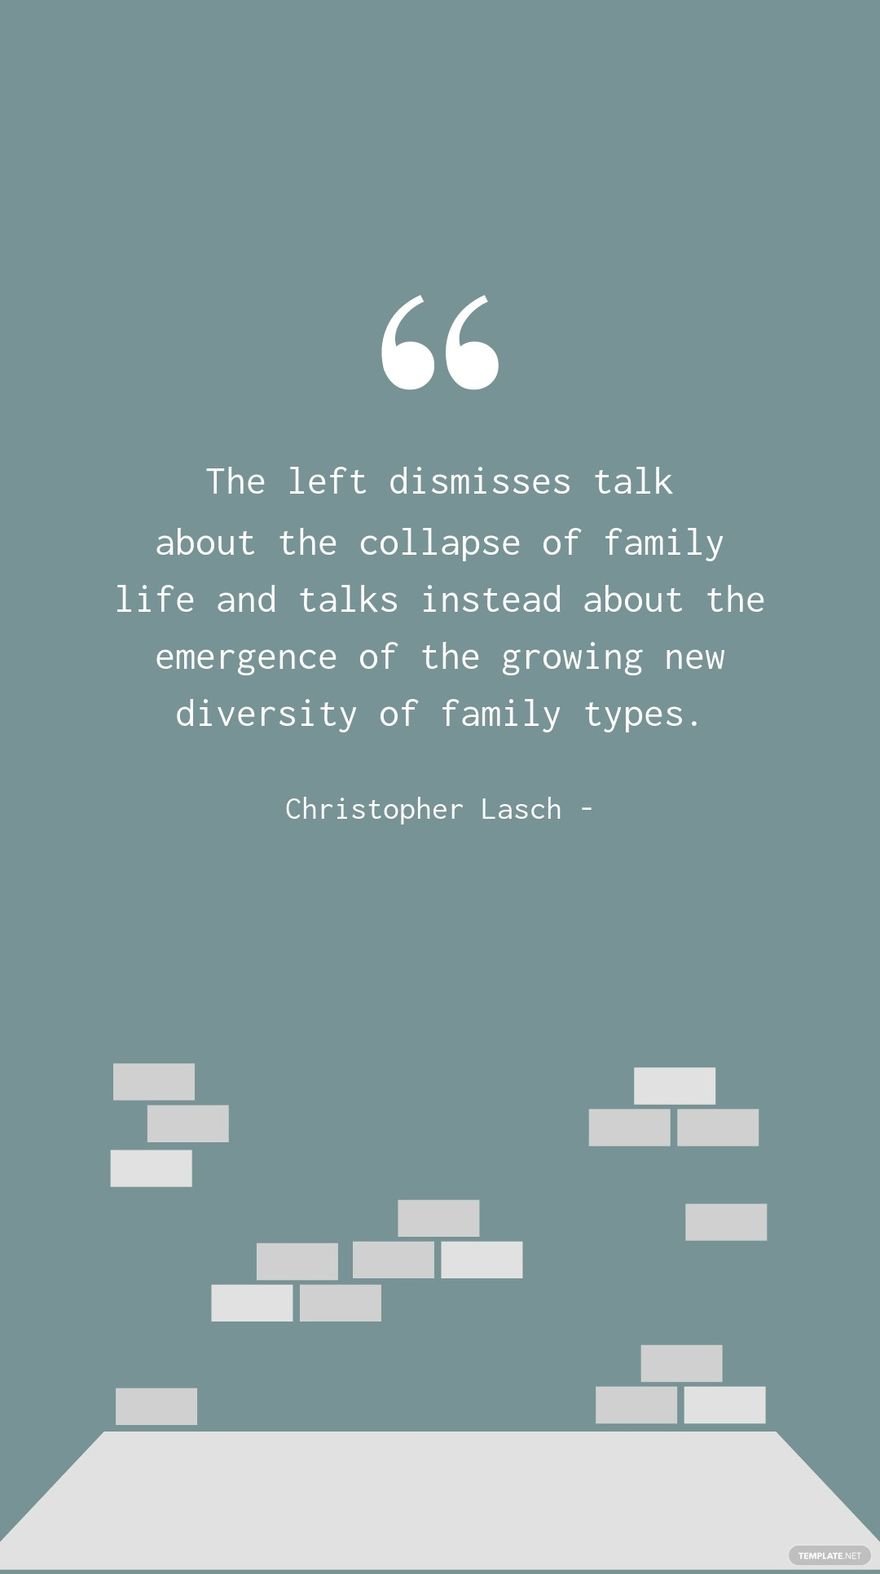 Christopher Lasch - The left dismisses talk about the collapse of family life and talks instead about the emergence of the growing new diversity of family types.